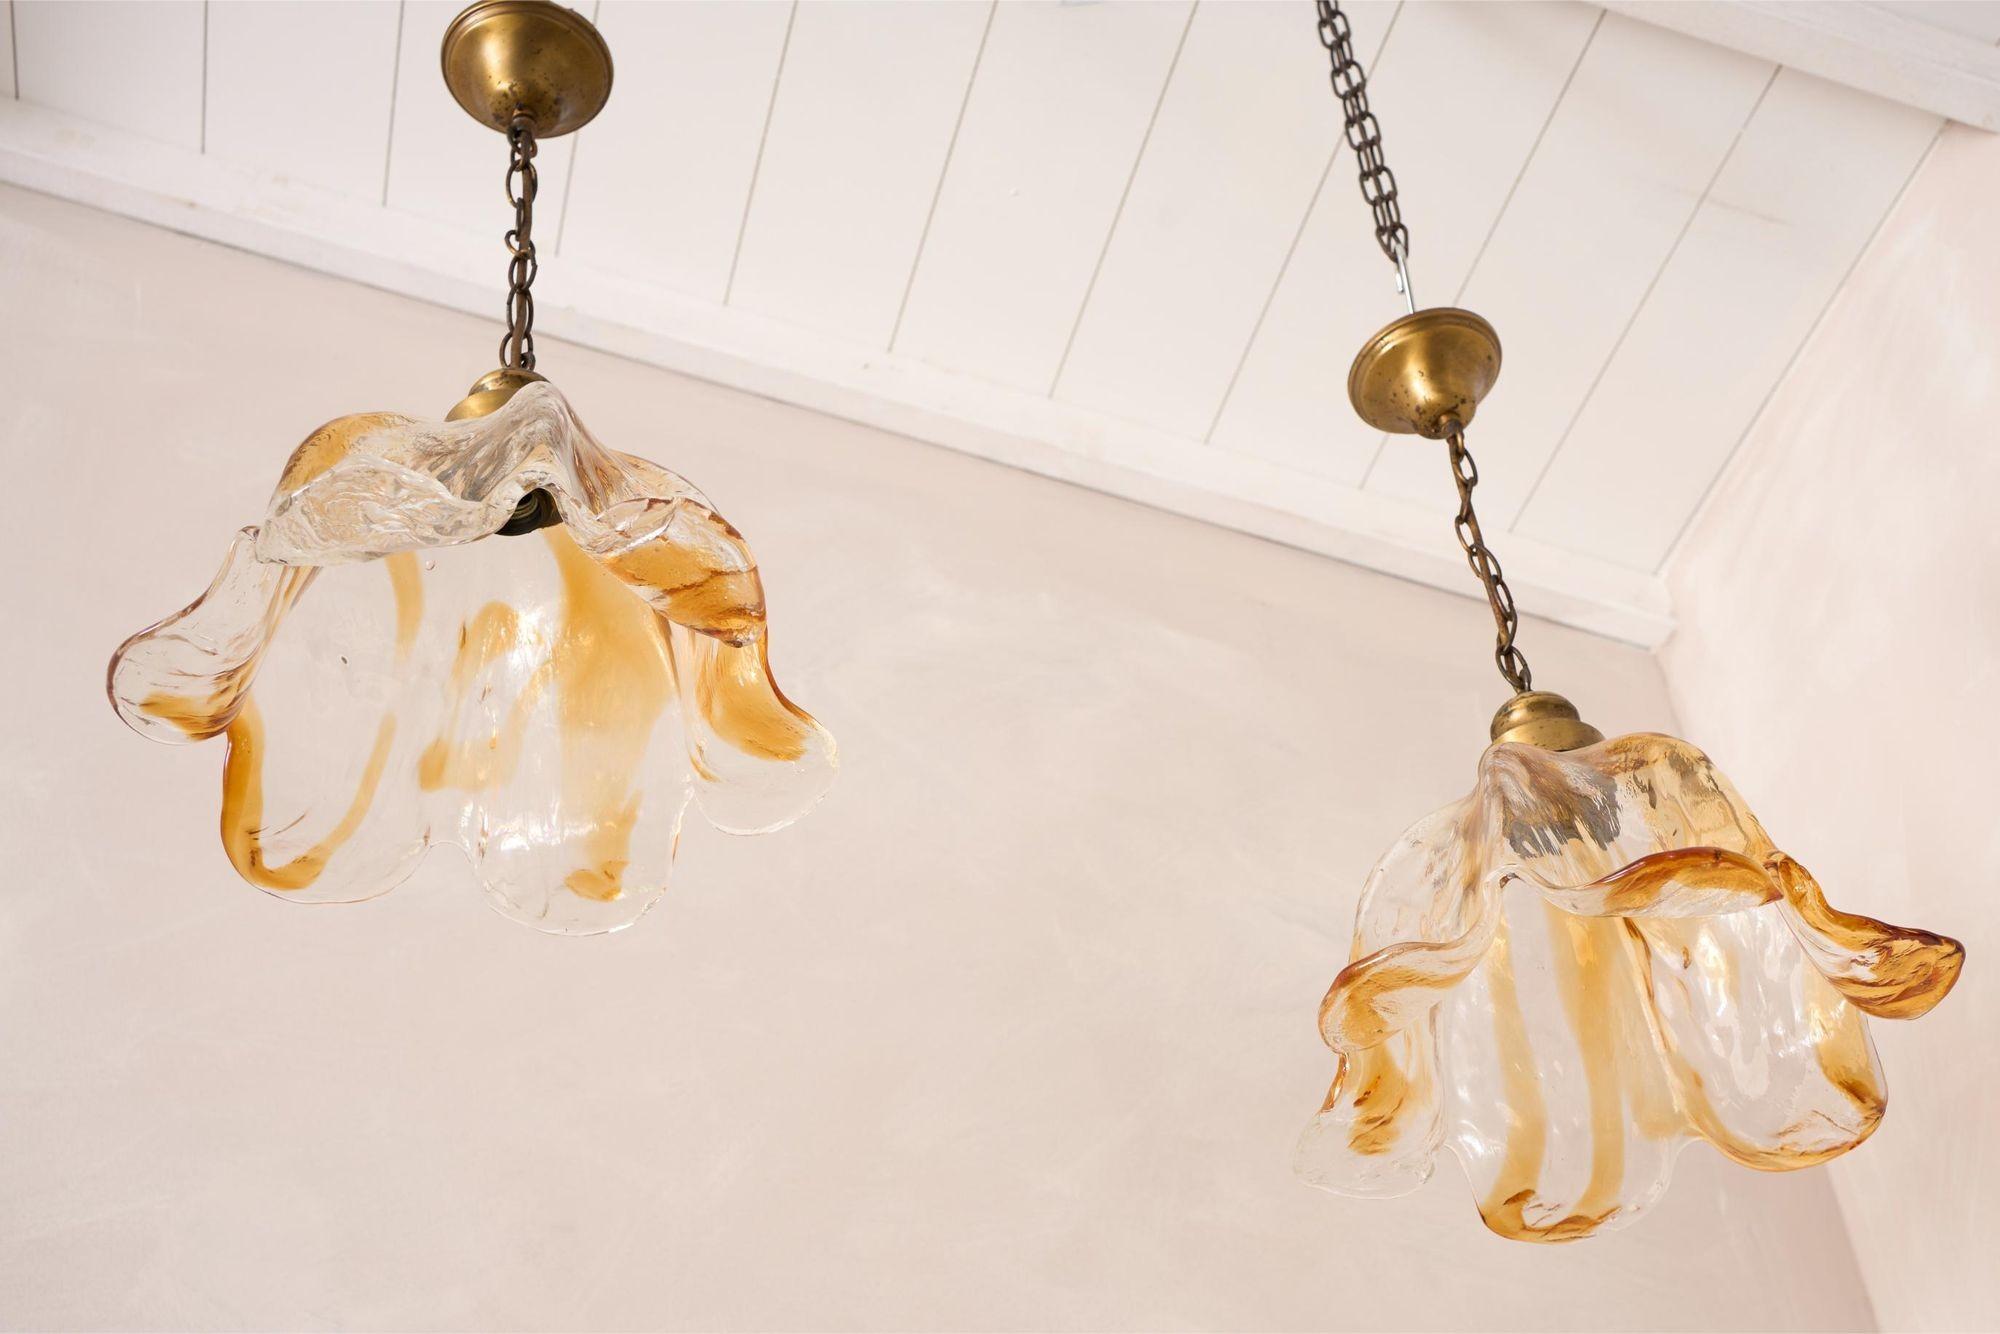 Spanish Amber glass tulip pendant lights - 10 available For Sale 1